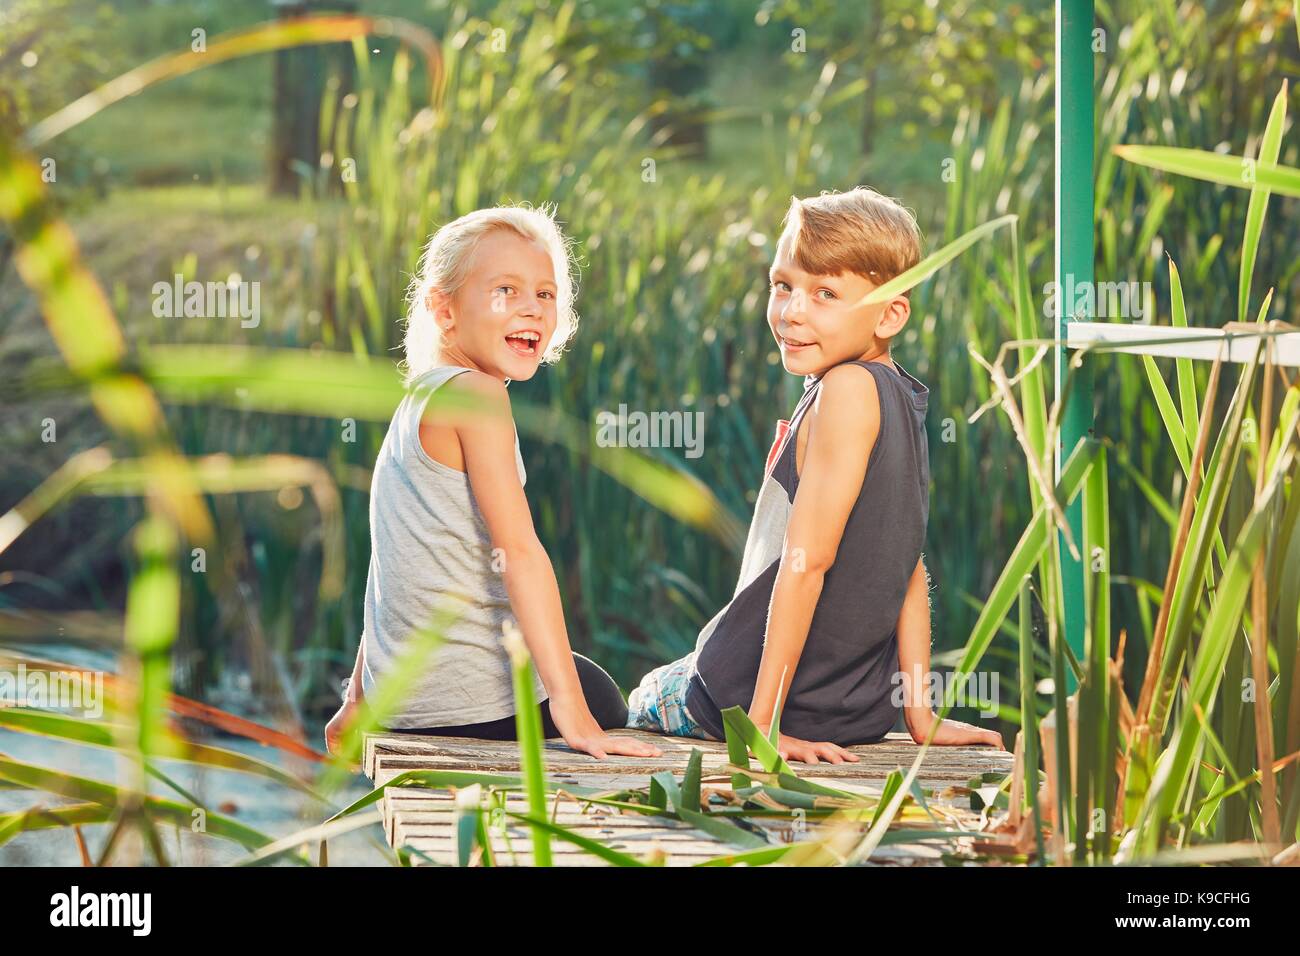 Summertime in the countryside. Two children (sibling or best friends) sitting on the pier of the lake. Stock Photo